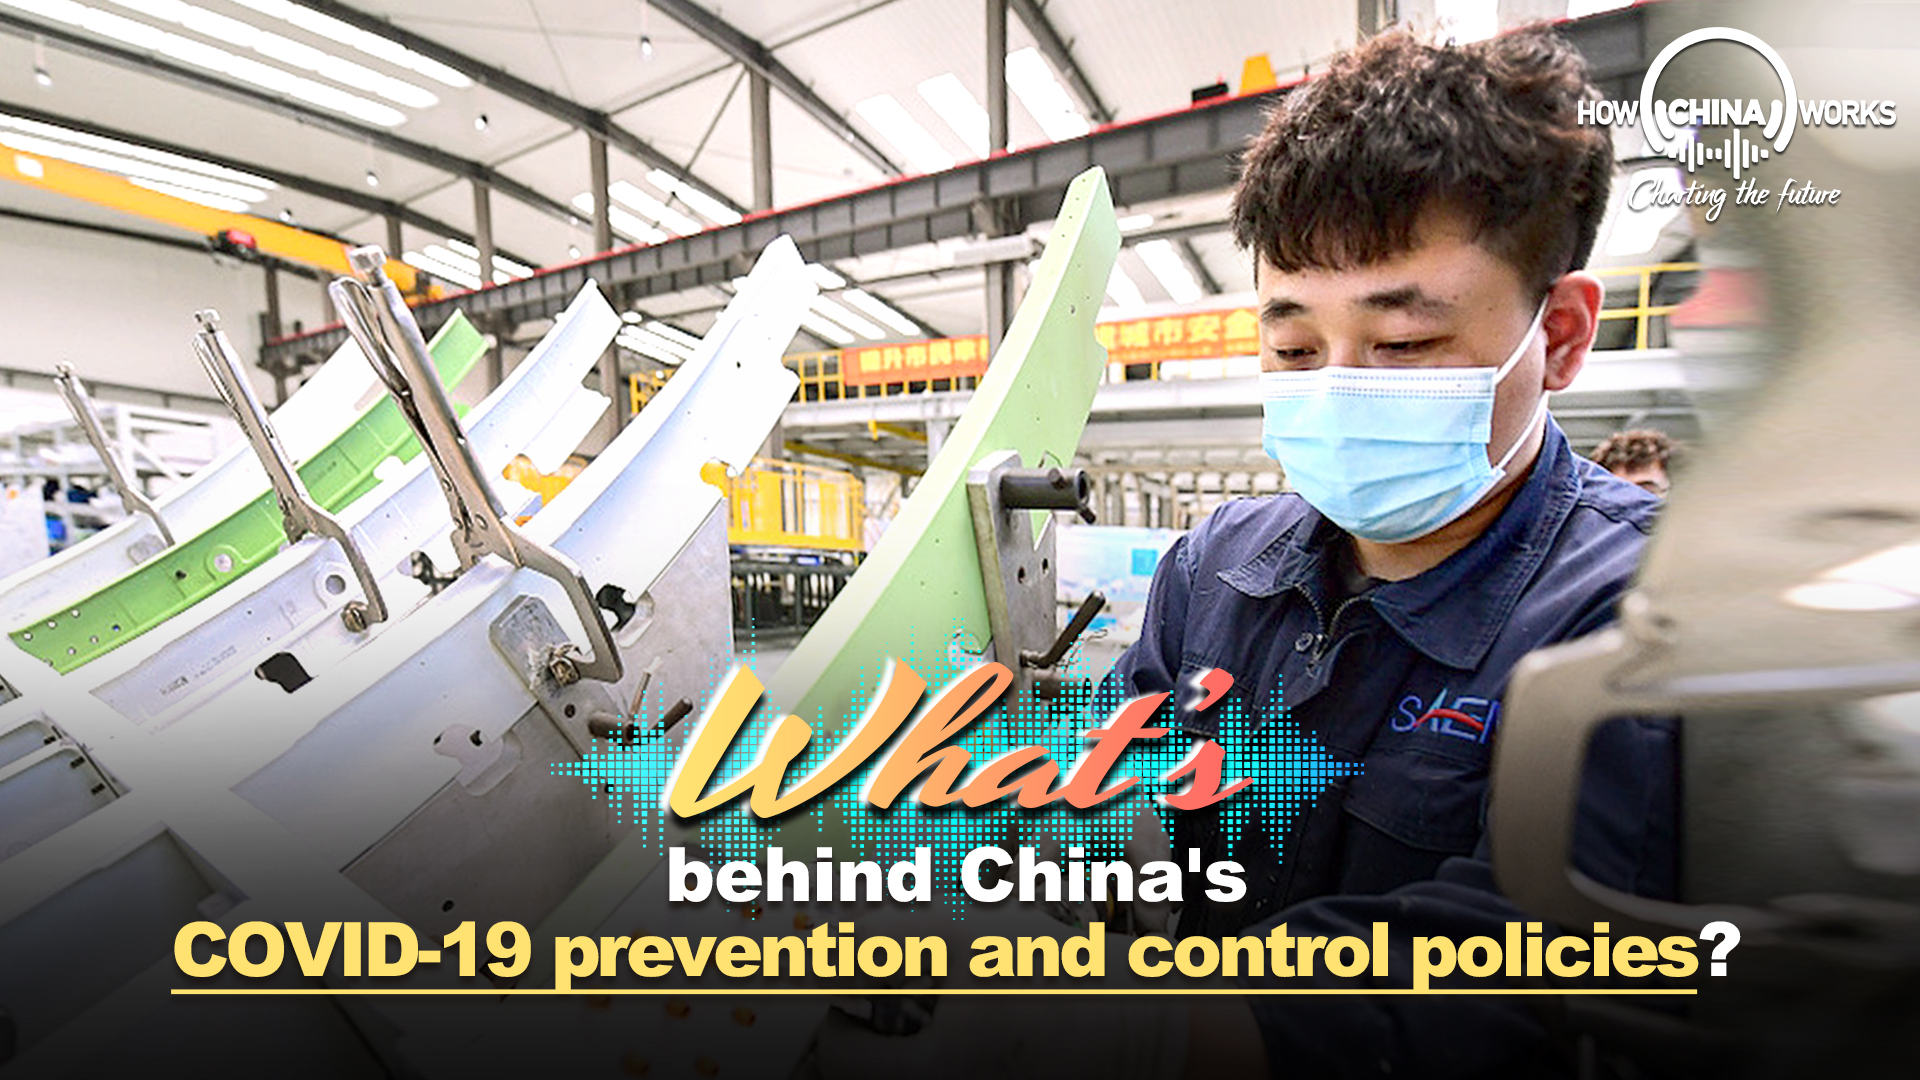 What's behind China's COVID-19 prevention and control policies?